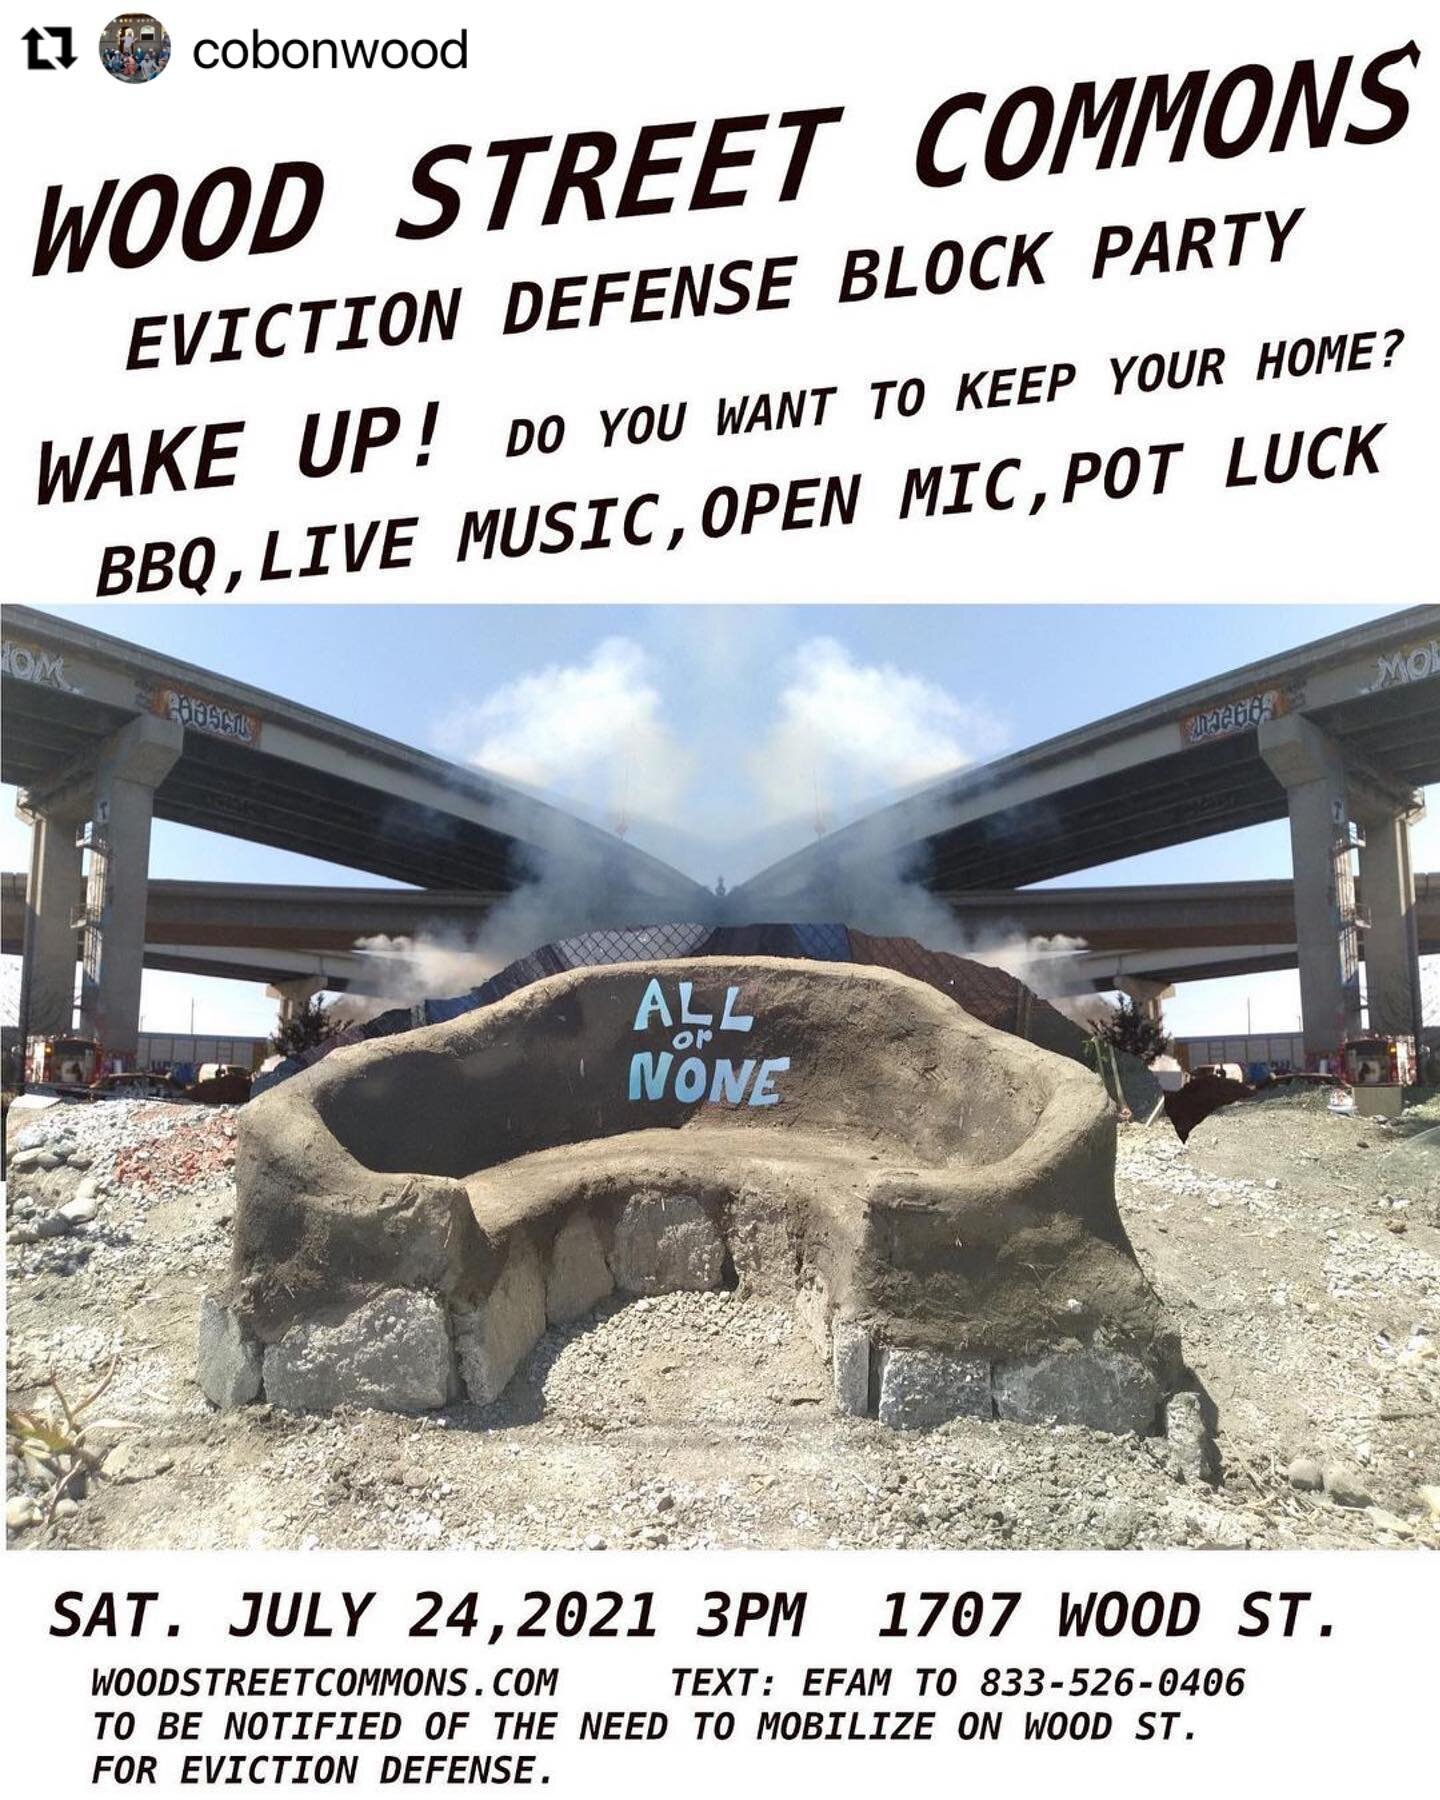 Remember a few weeks ago when organizers didn&rsquo;t ask residents if it was okay to throw a show at Wood street and they weren&rsquo;t accountable for how it fucked up the encampment, and none of them responded to our DM&rsquo;s but they sure had a